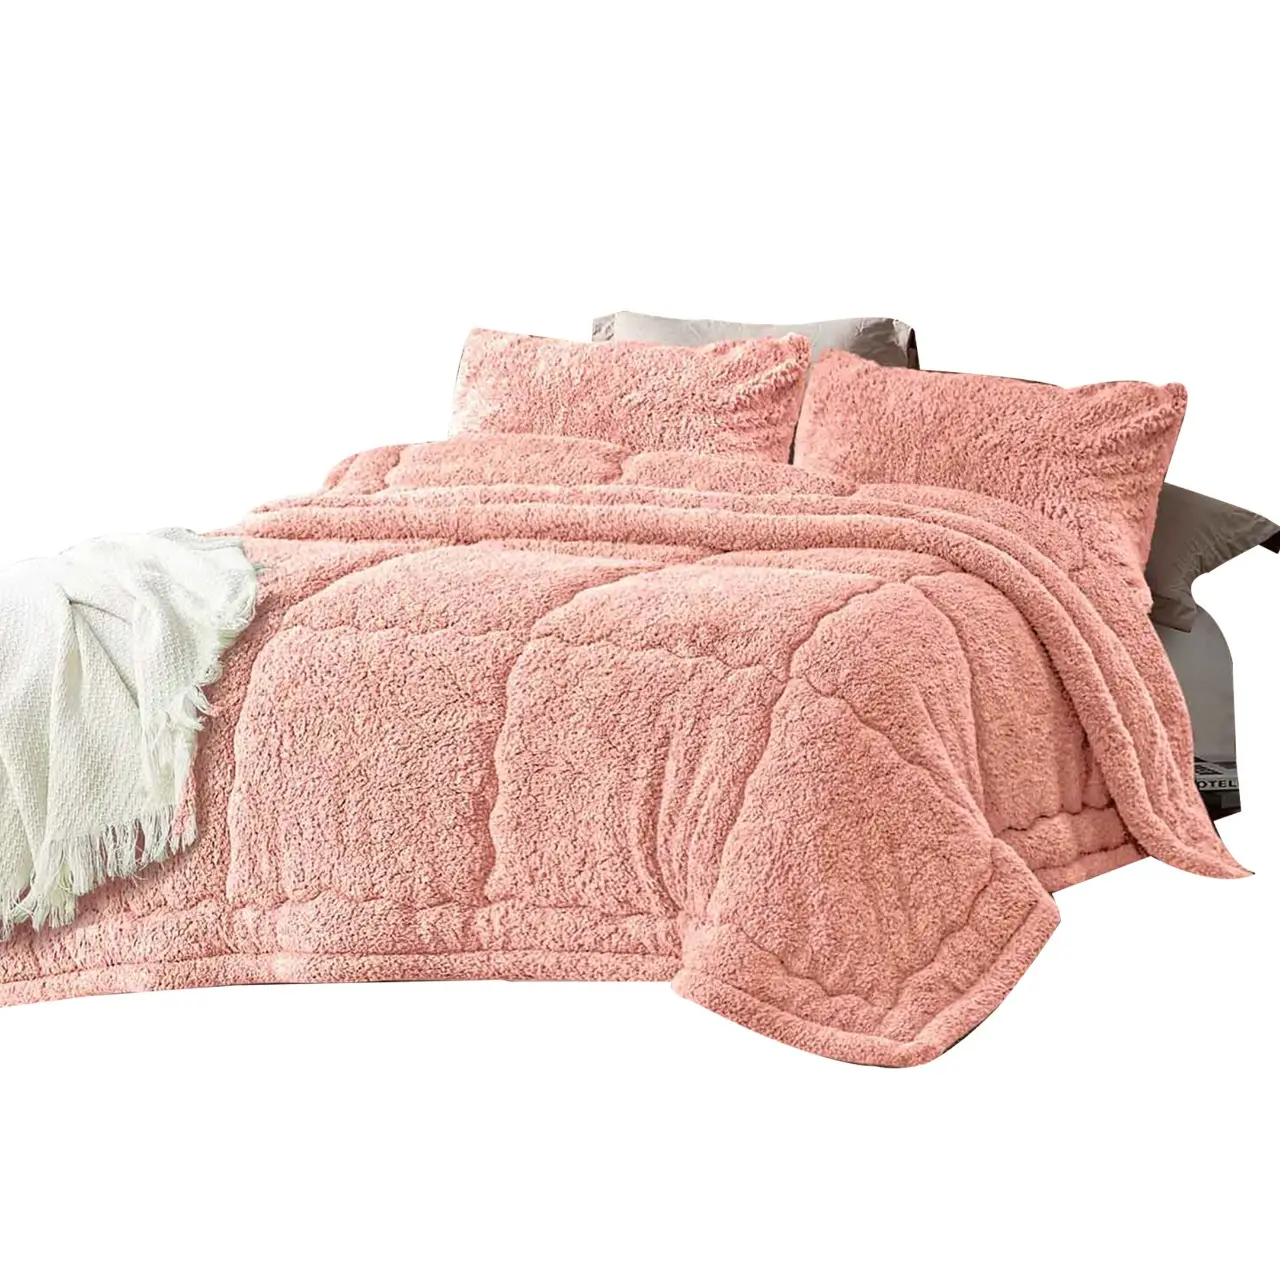 Wholesale Cozy Sherpa Filled Comforter Set Dusky Rose double sided sherpa comforter used from both sides for bedroom comfort